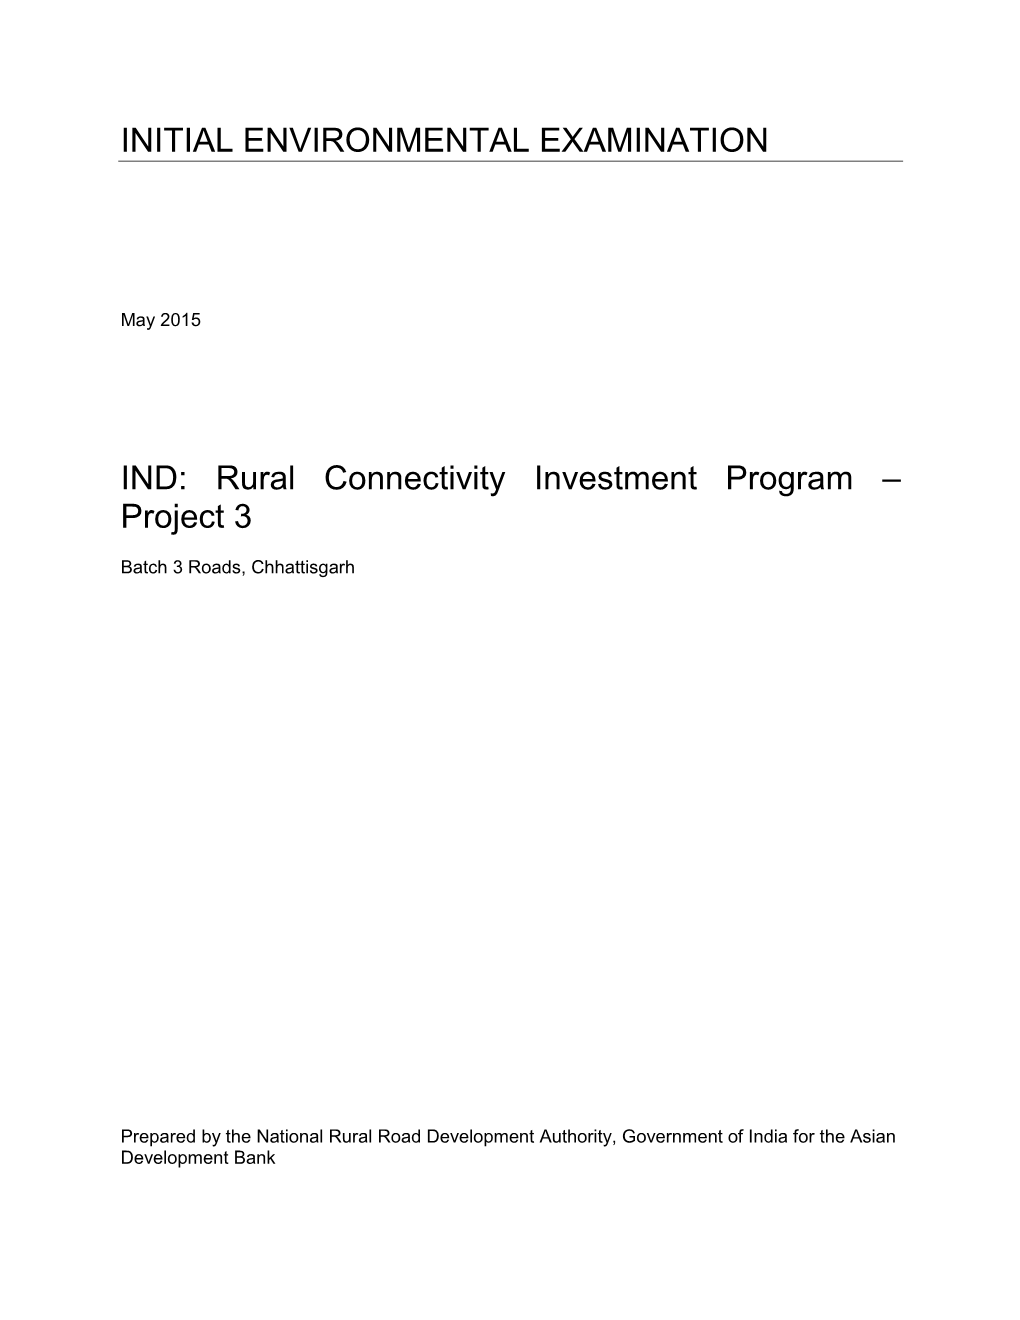 IND: Rural Connectivity Investment Program – Project 3